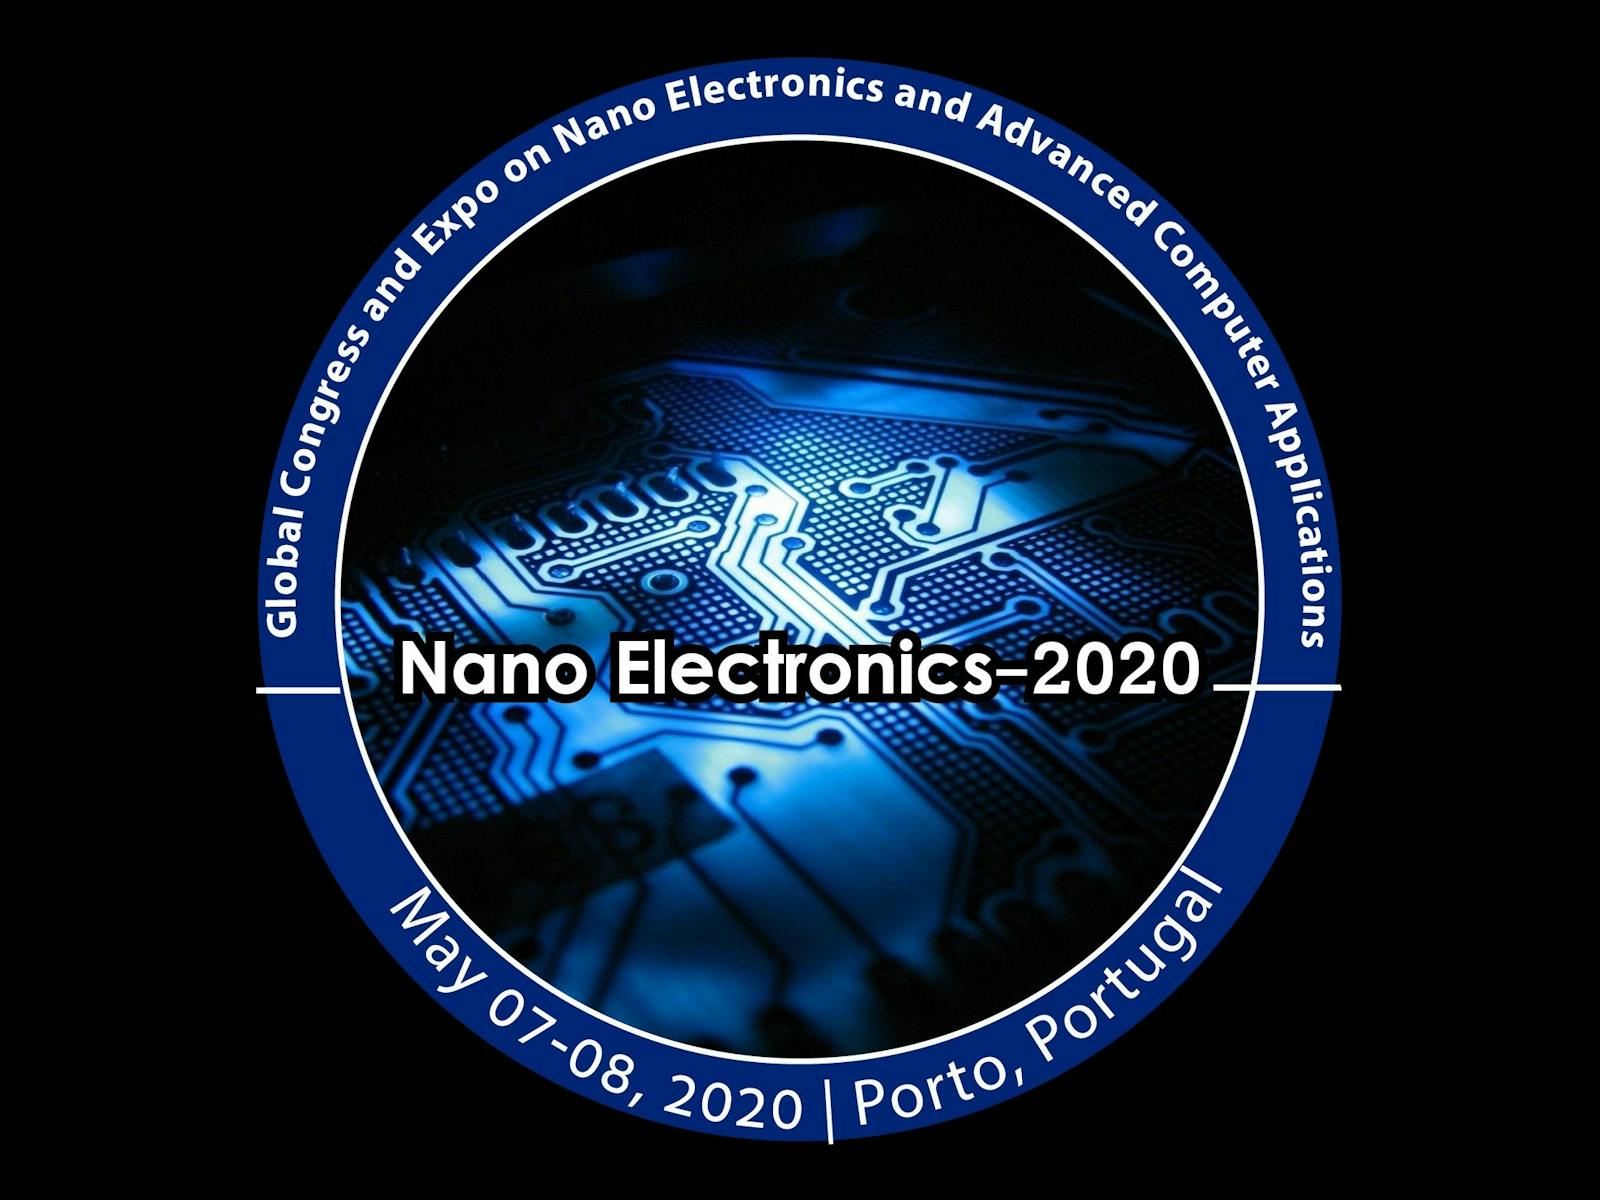 Image for Global Congress and Expo on Nano Electronics and Advanced Computer Applications